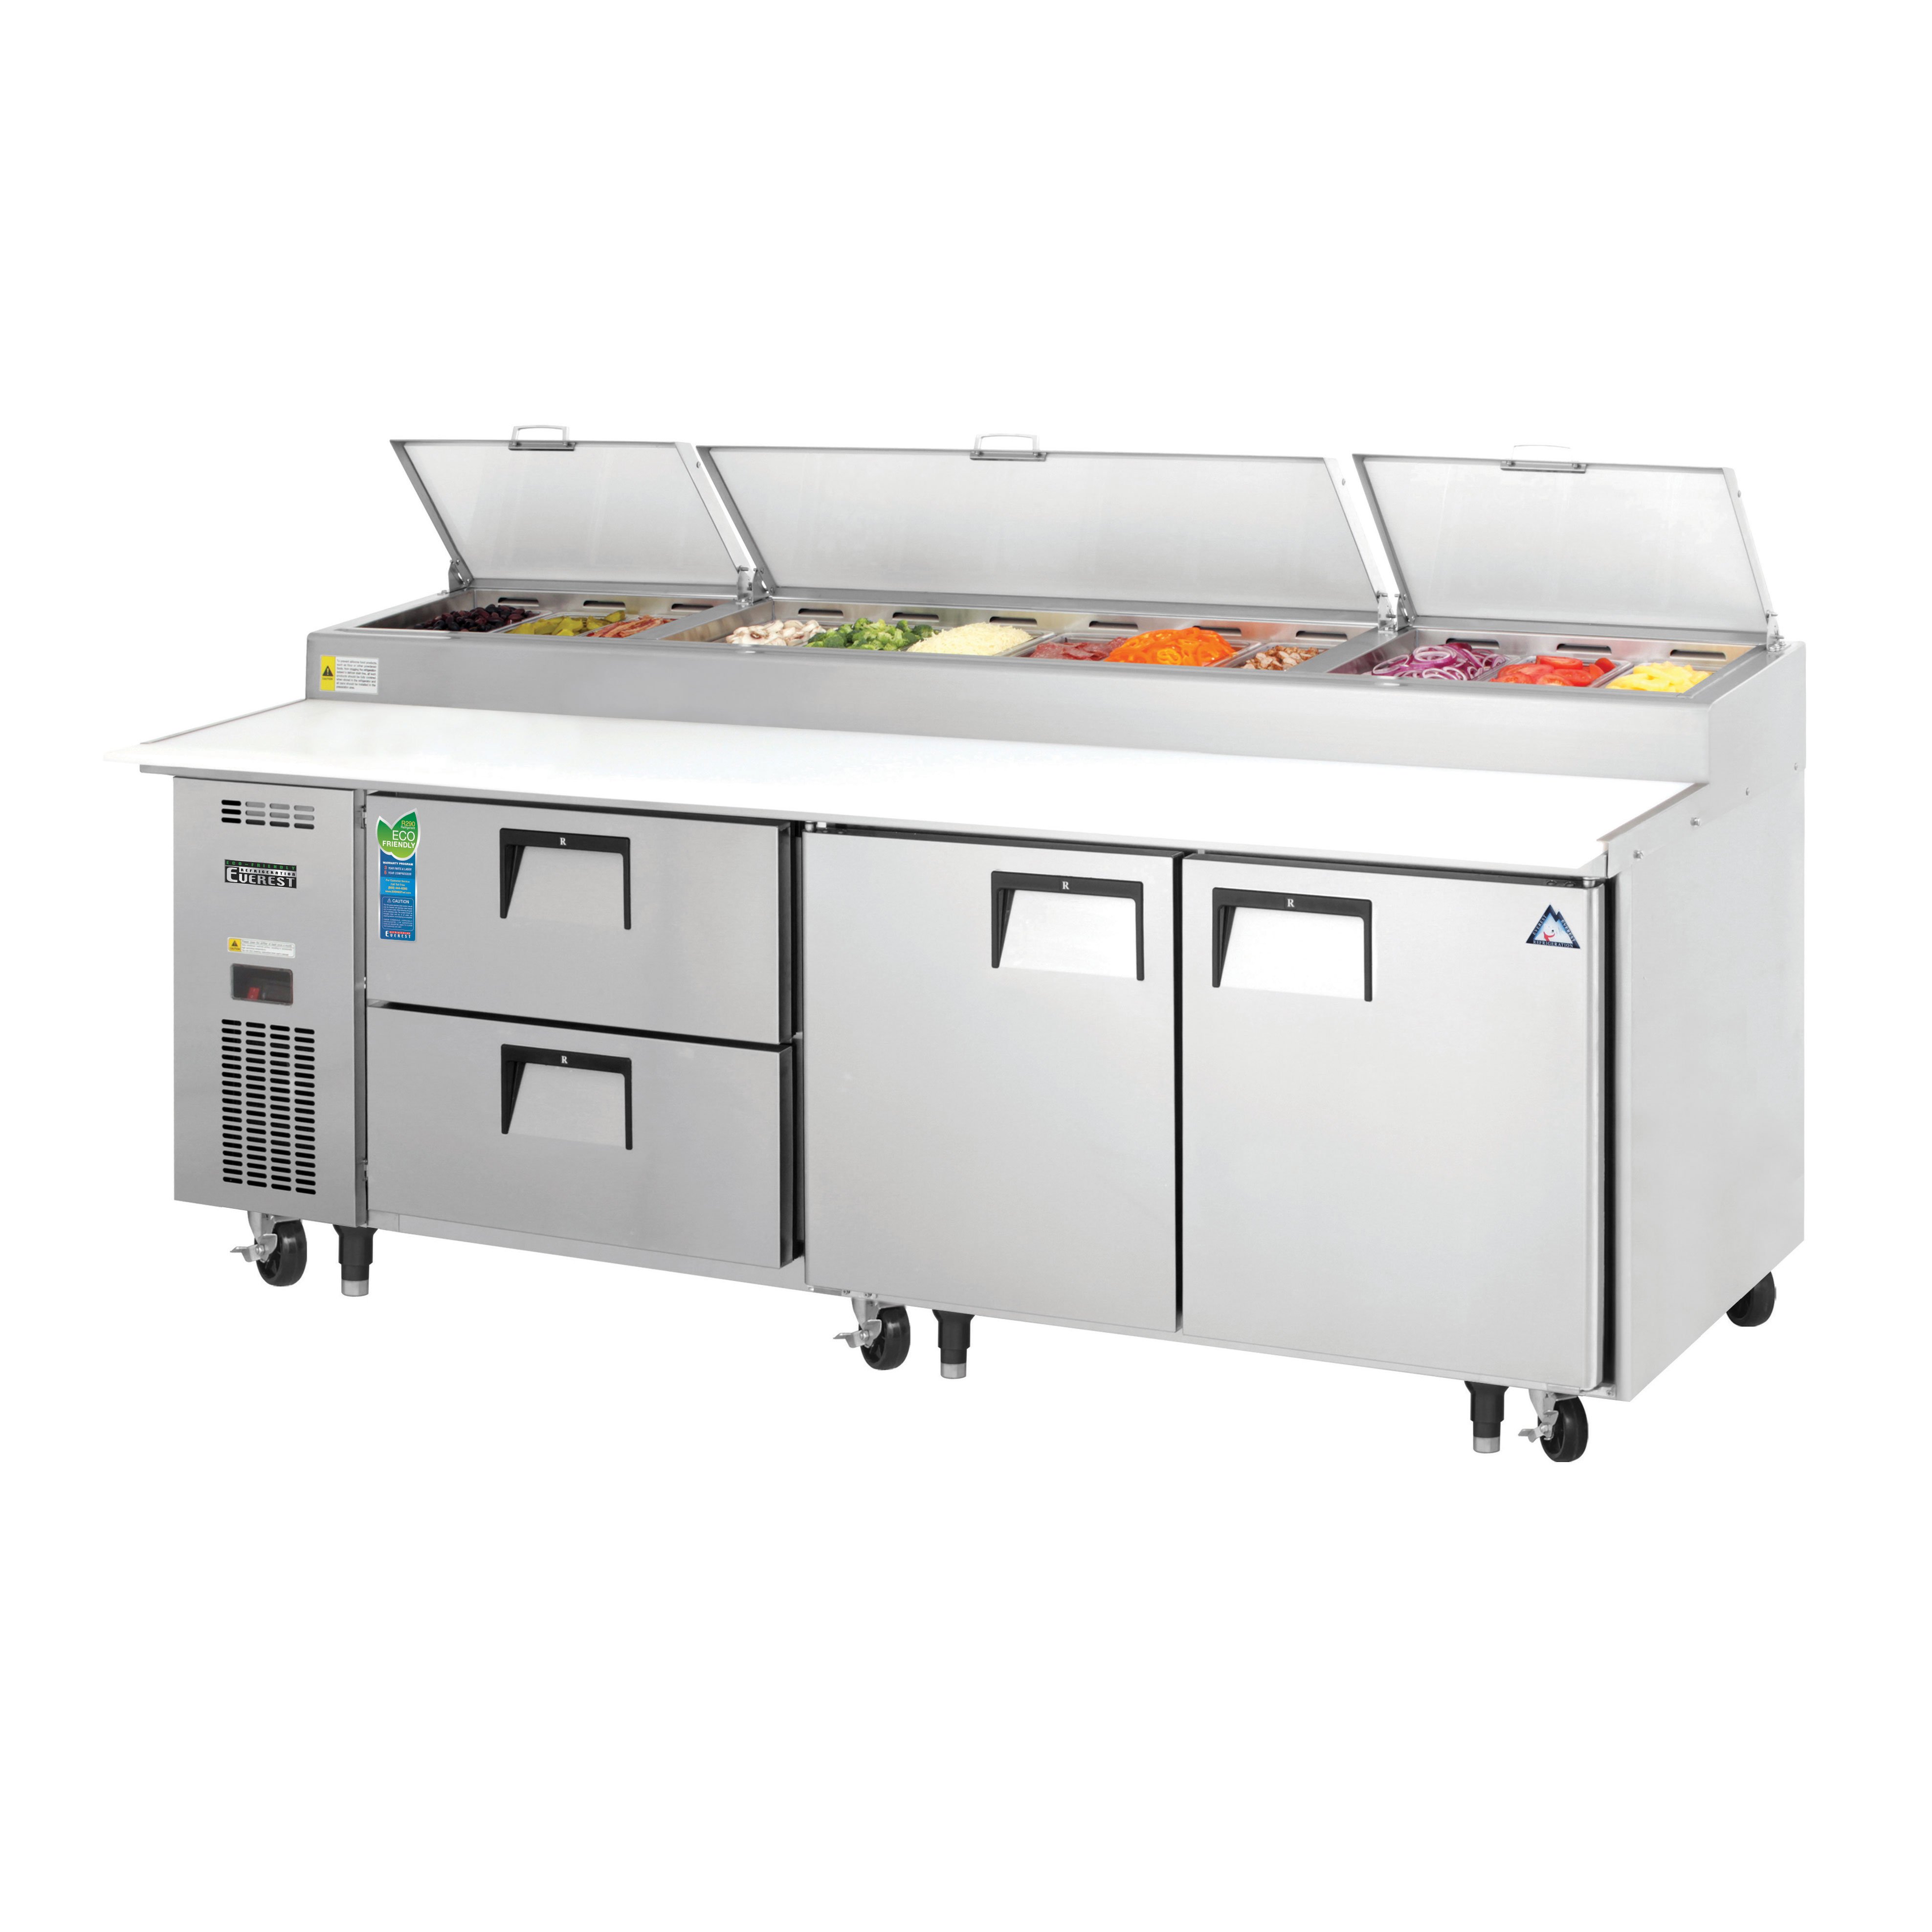 Everest EPPR3-D2 93″ Three Section Drawered Pizza Prep Table, 2 Drawer